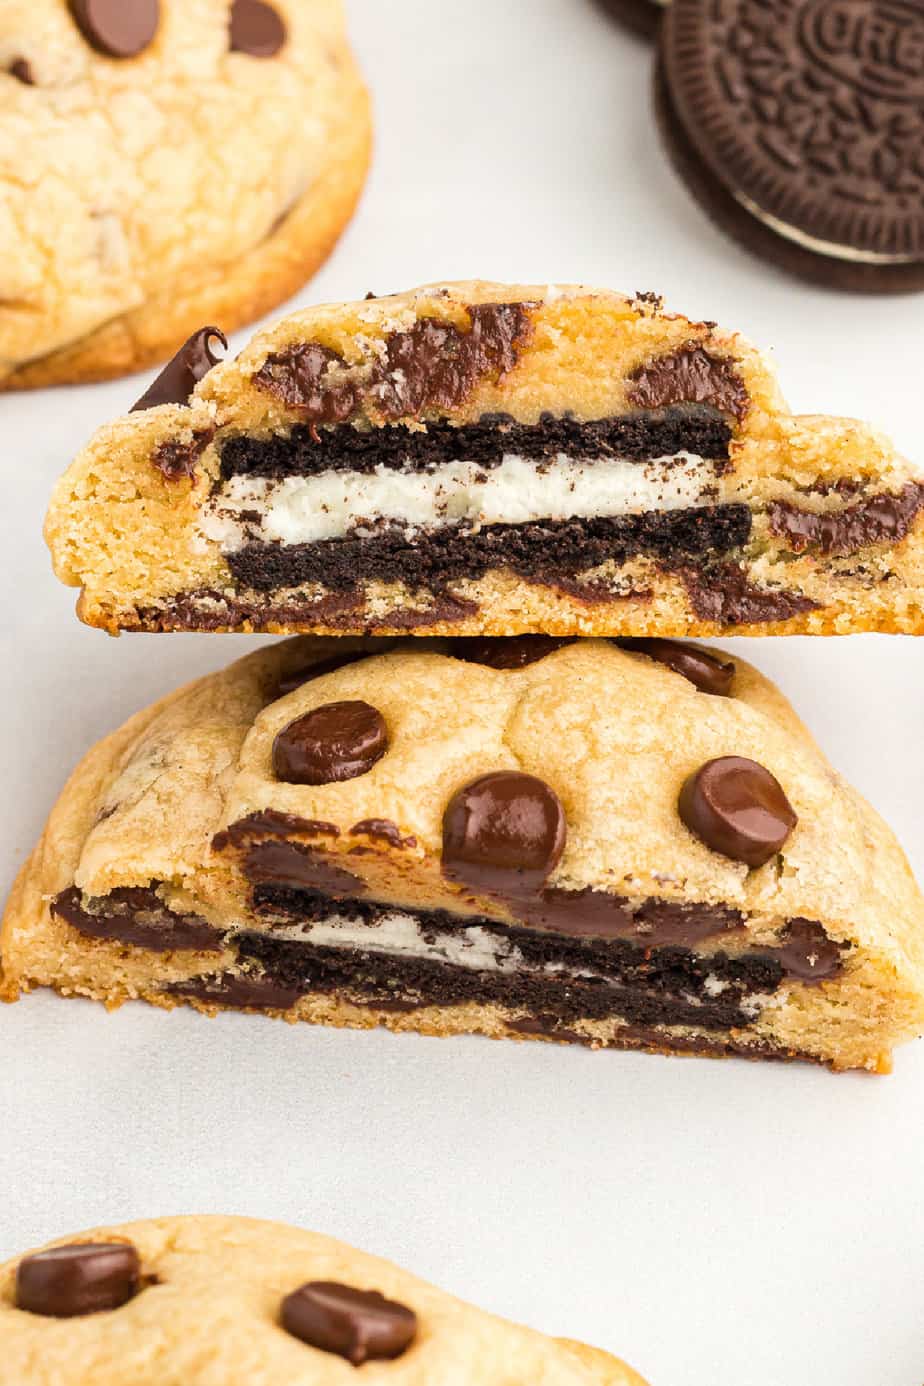 Close up of a chocolate chip cookie stuffed with an Oreo sliced in half up close on a counter with more chocolate chip and Oreo cookies nearby.